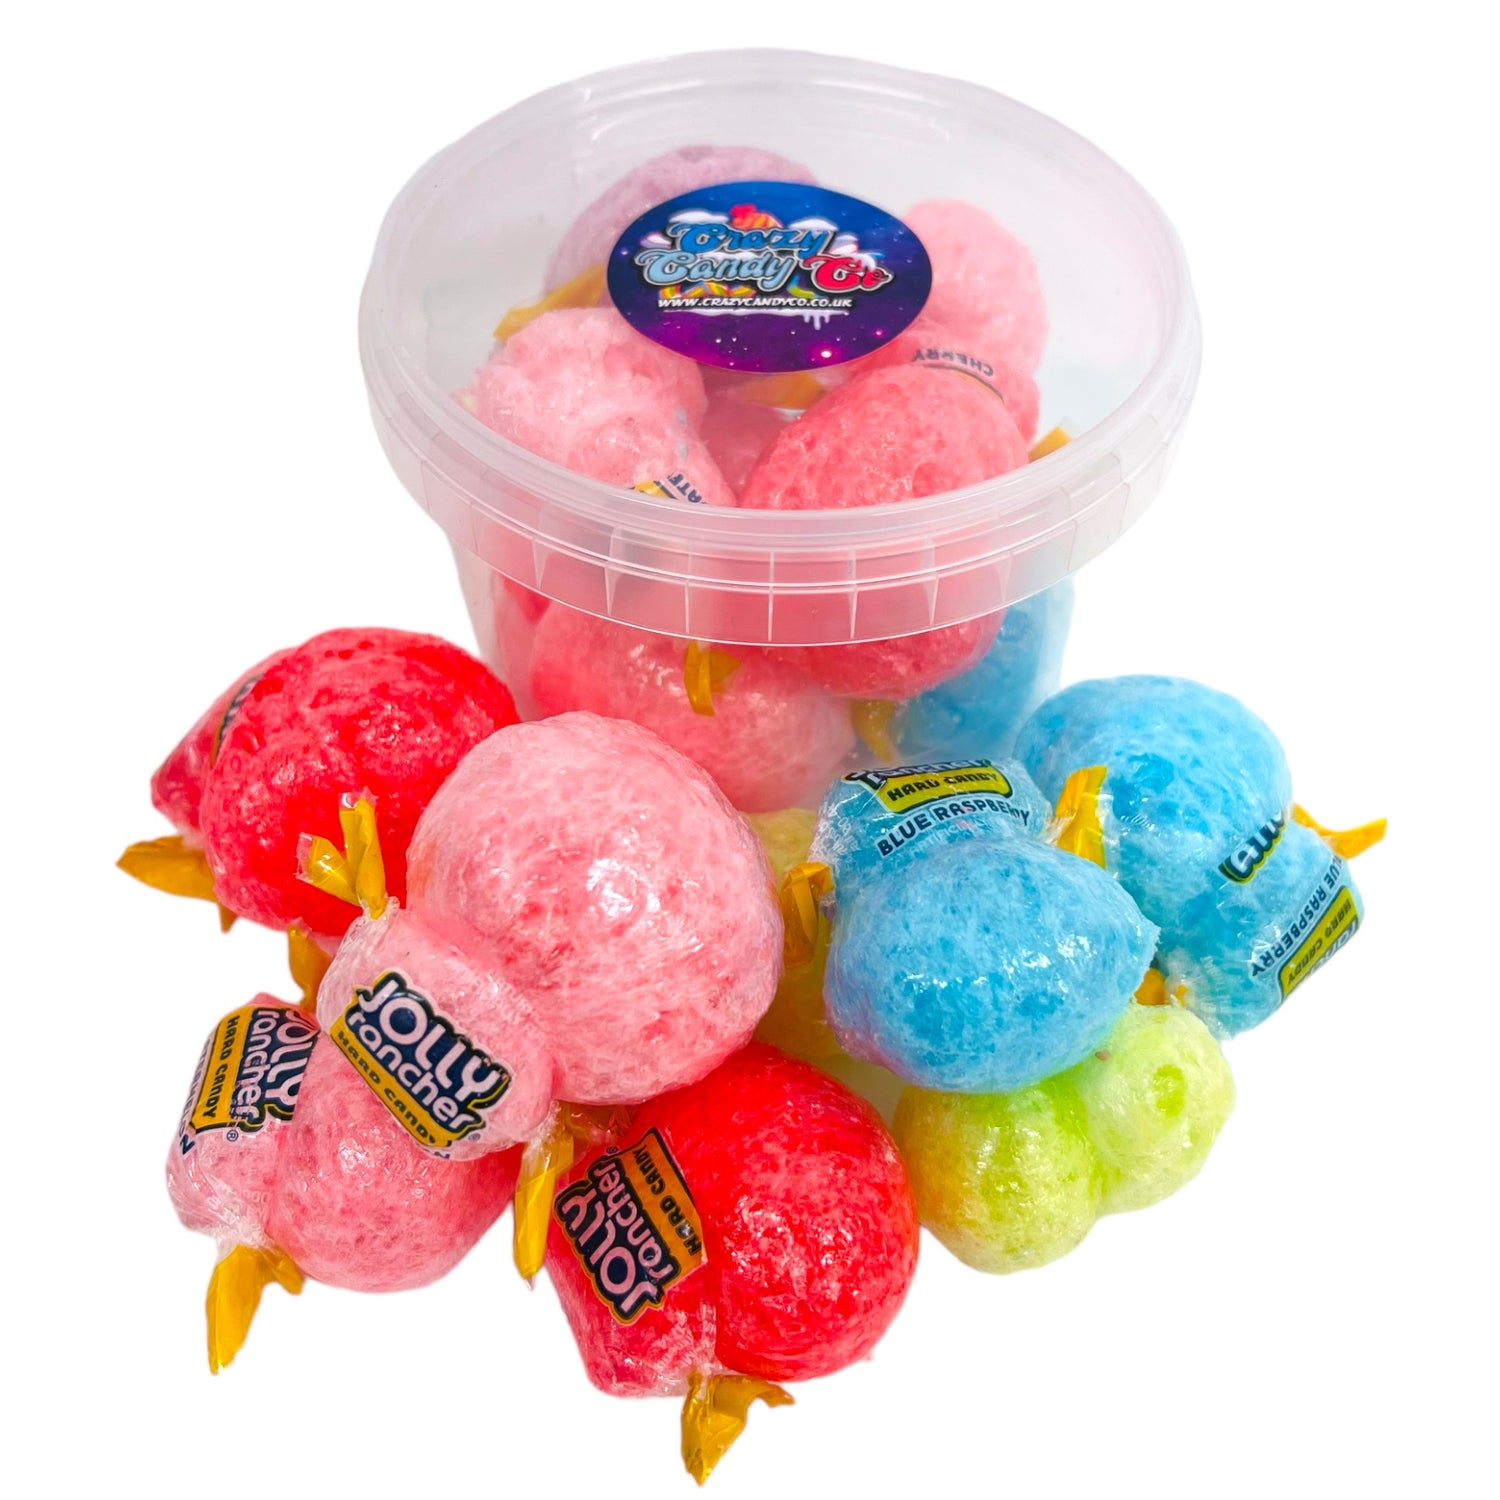 Jolly Ranchers Freeze Dried Sweets Tub (Vegan) MADE TO ORDER DISPATCH IN 2 DAYS